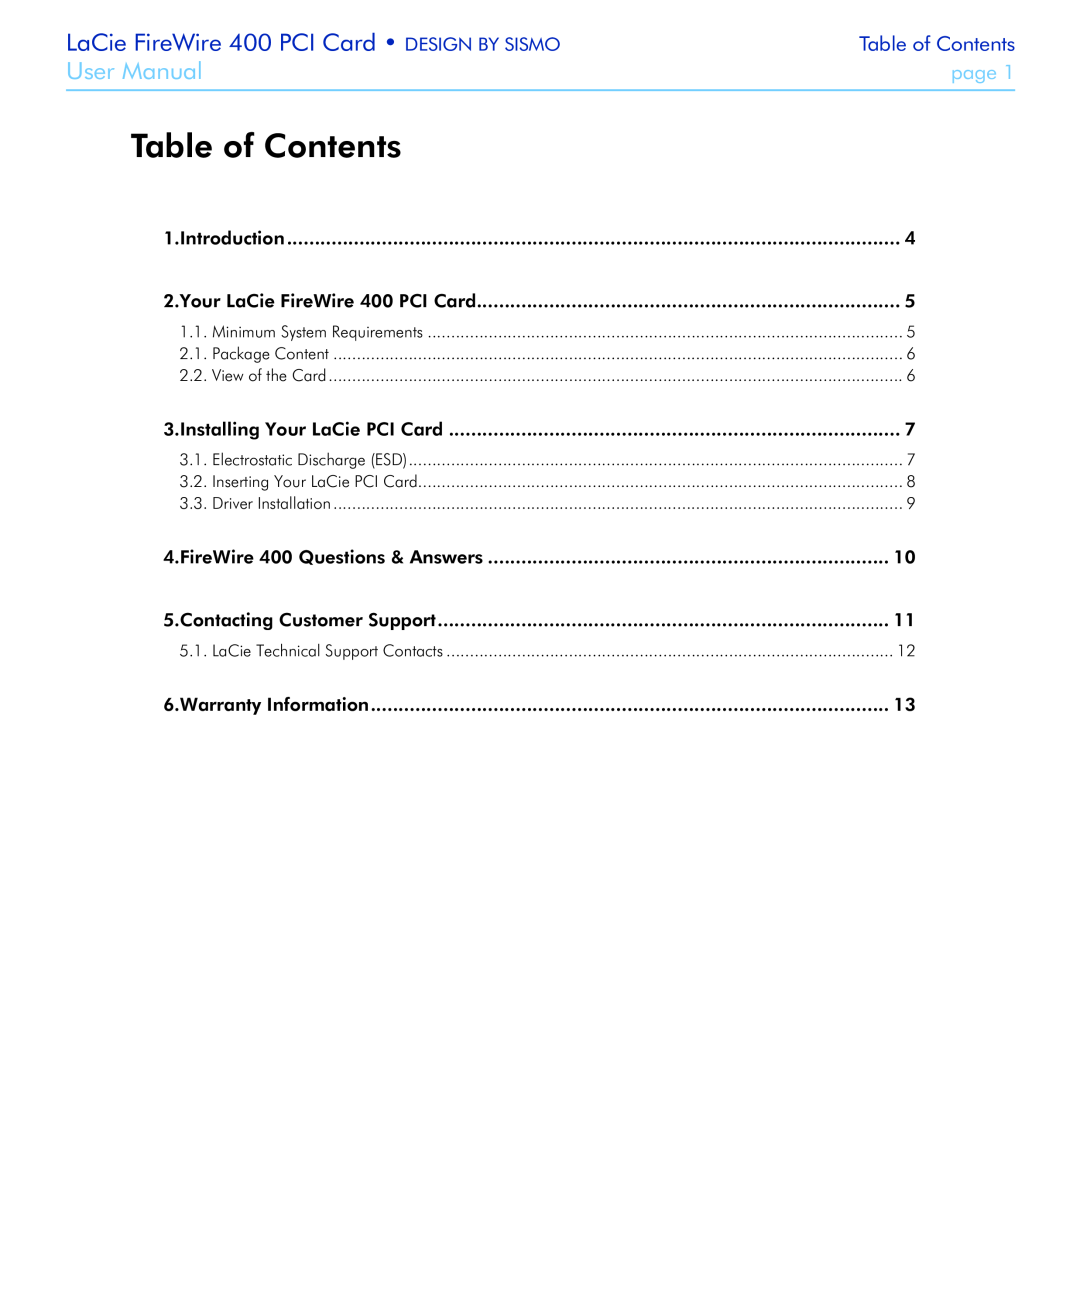 LaCie user manual Table of Contents, LaCie FireWire 400 PCI Card DESIGN BY SISMO, User Manual, page, Introduction 